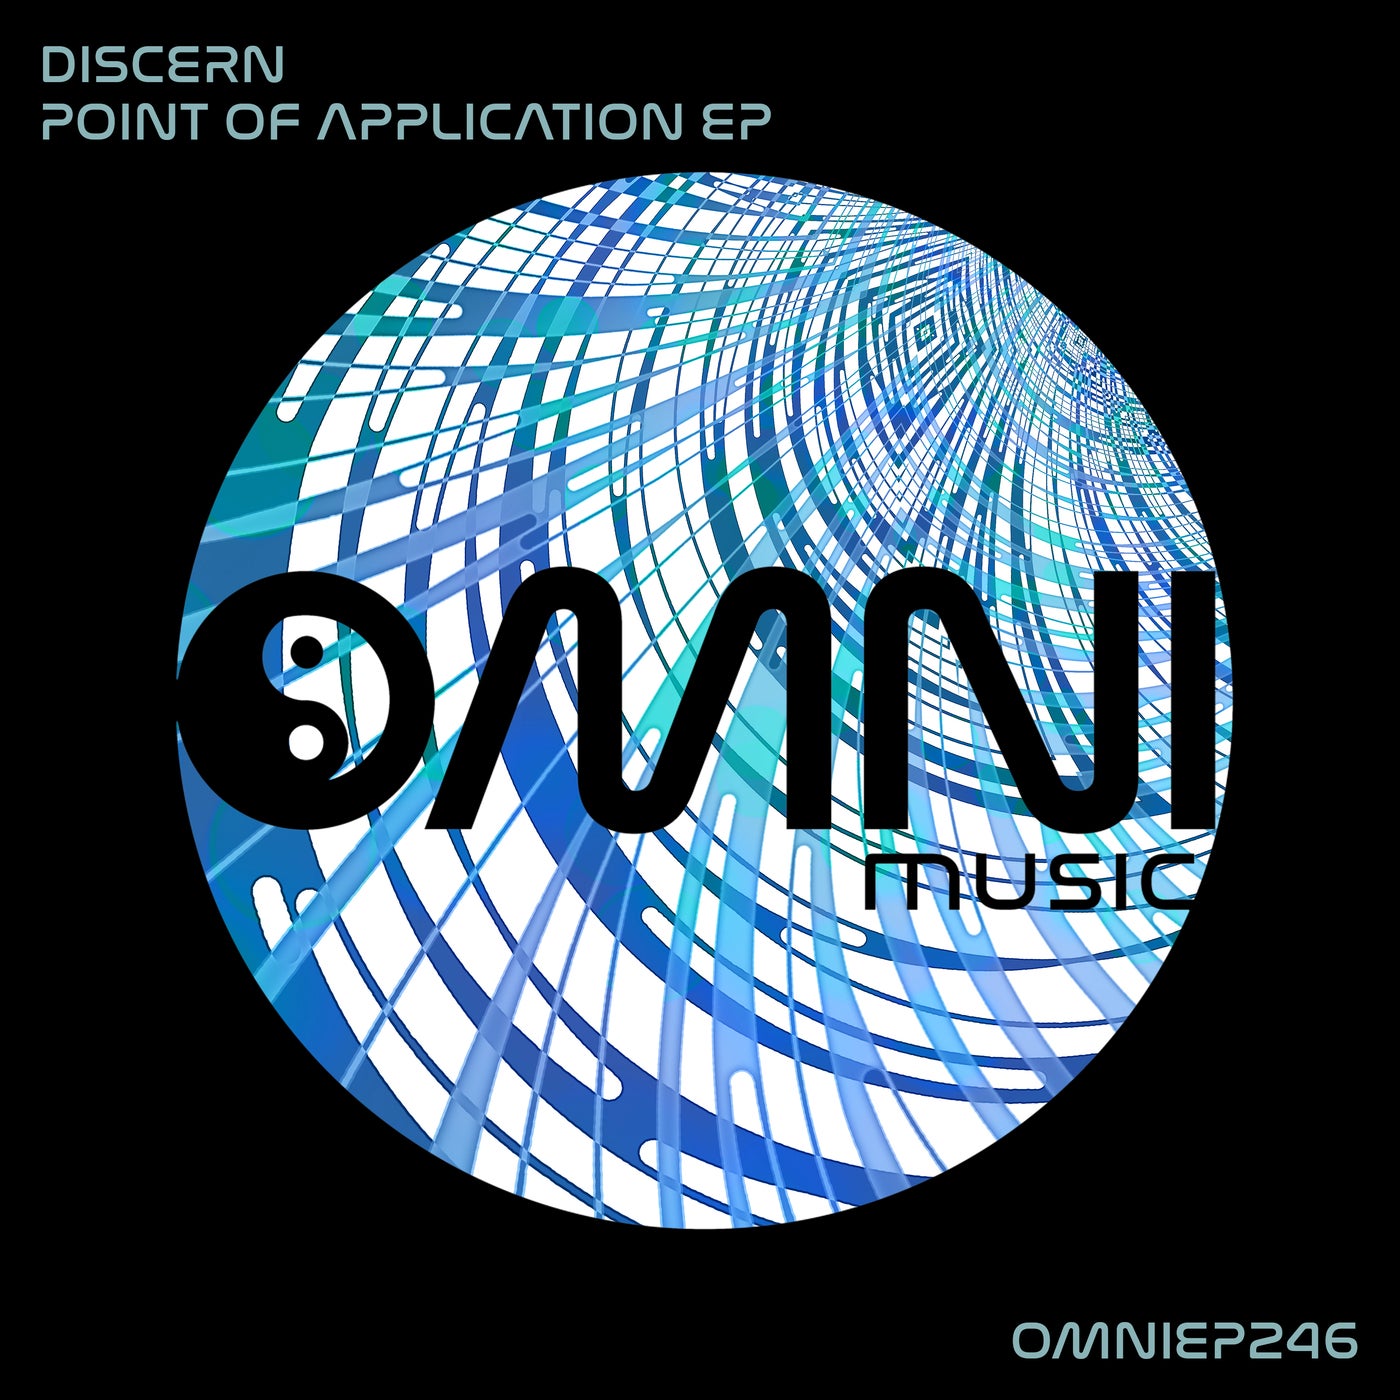 Point of Application EP